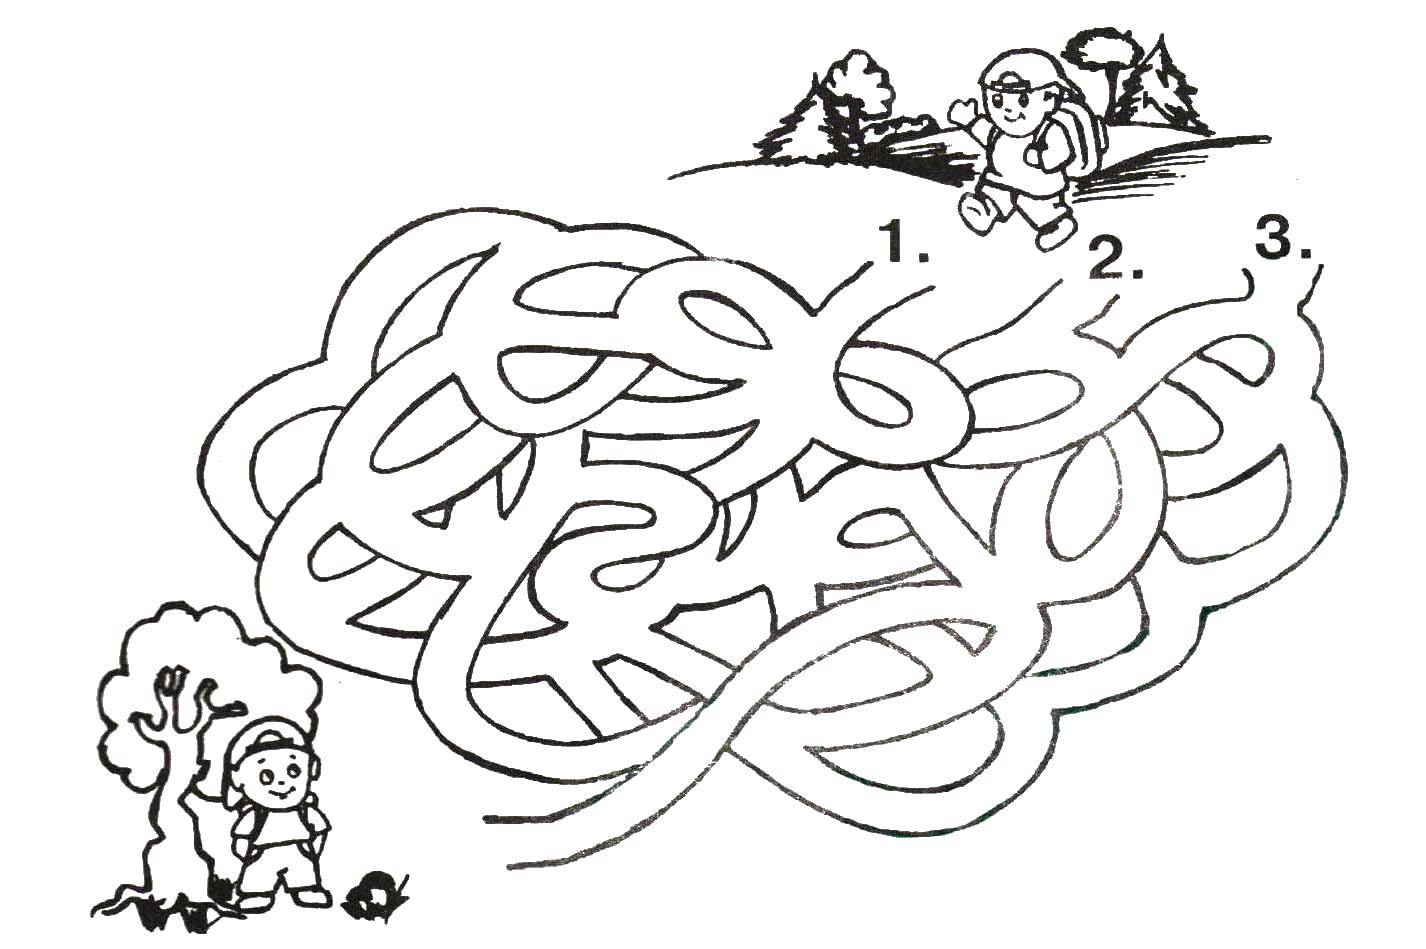 Coloring Help reach other through the maze. Category mazes. Tags:  Maze, logic.